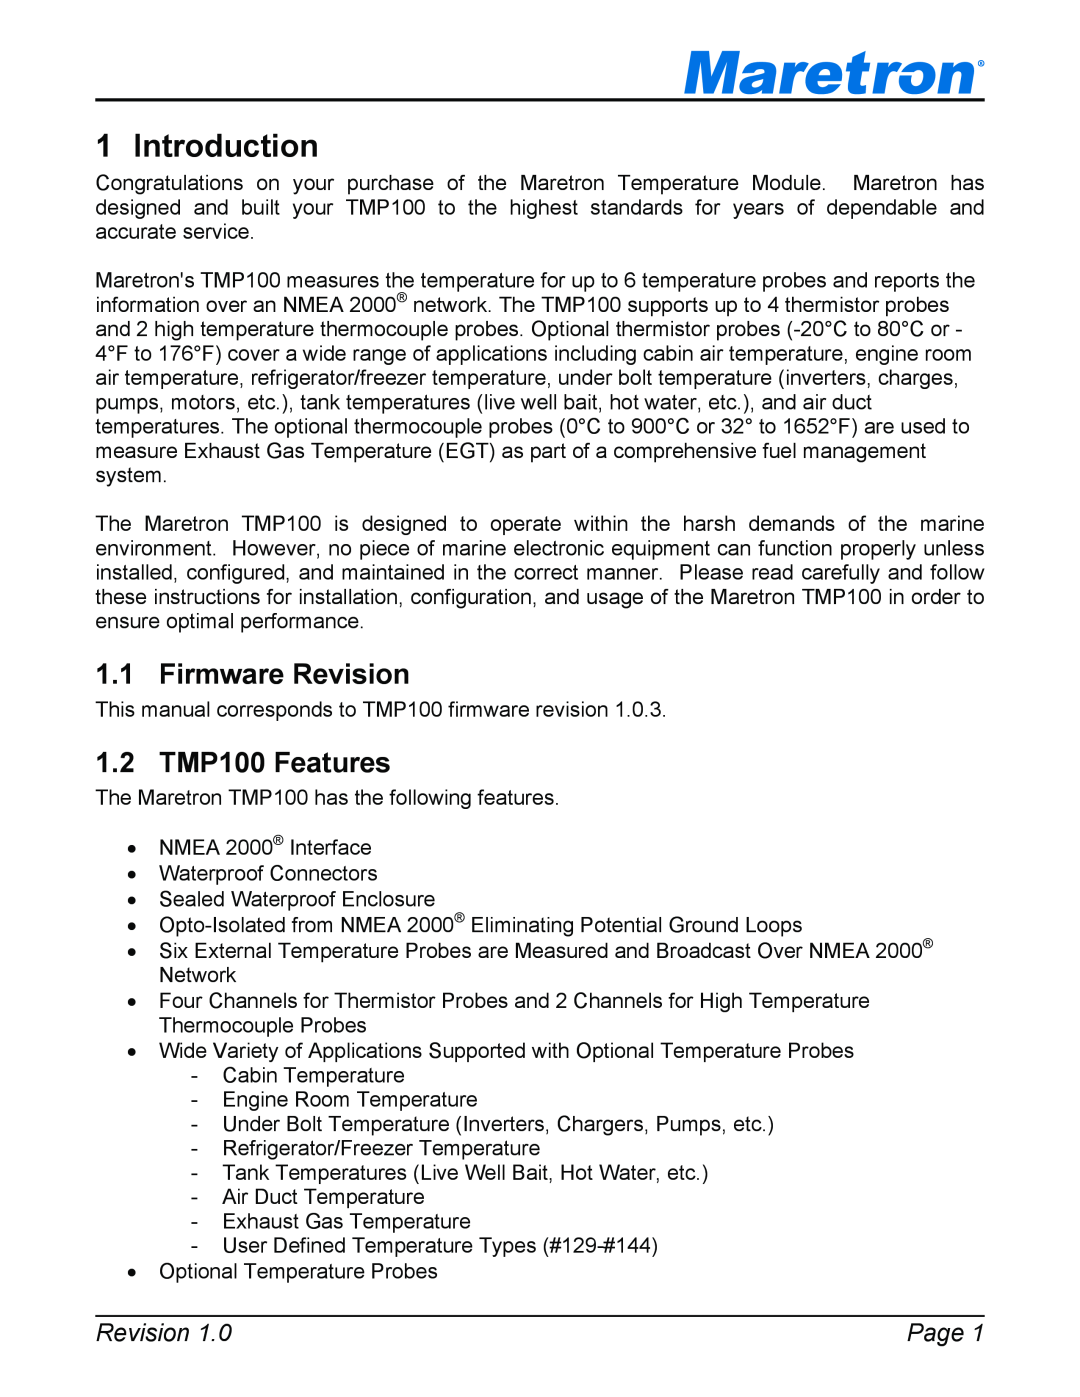 Maretron TP-EGT-1 user manual Introduction, Firmware Revision, 1.2 TMP100 Features, Page 